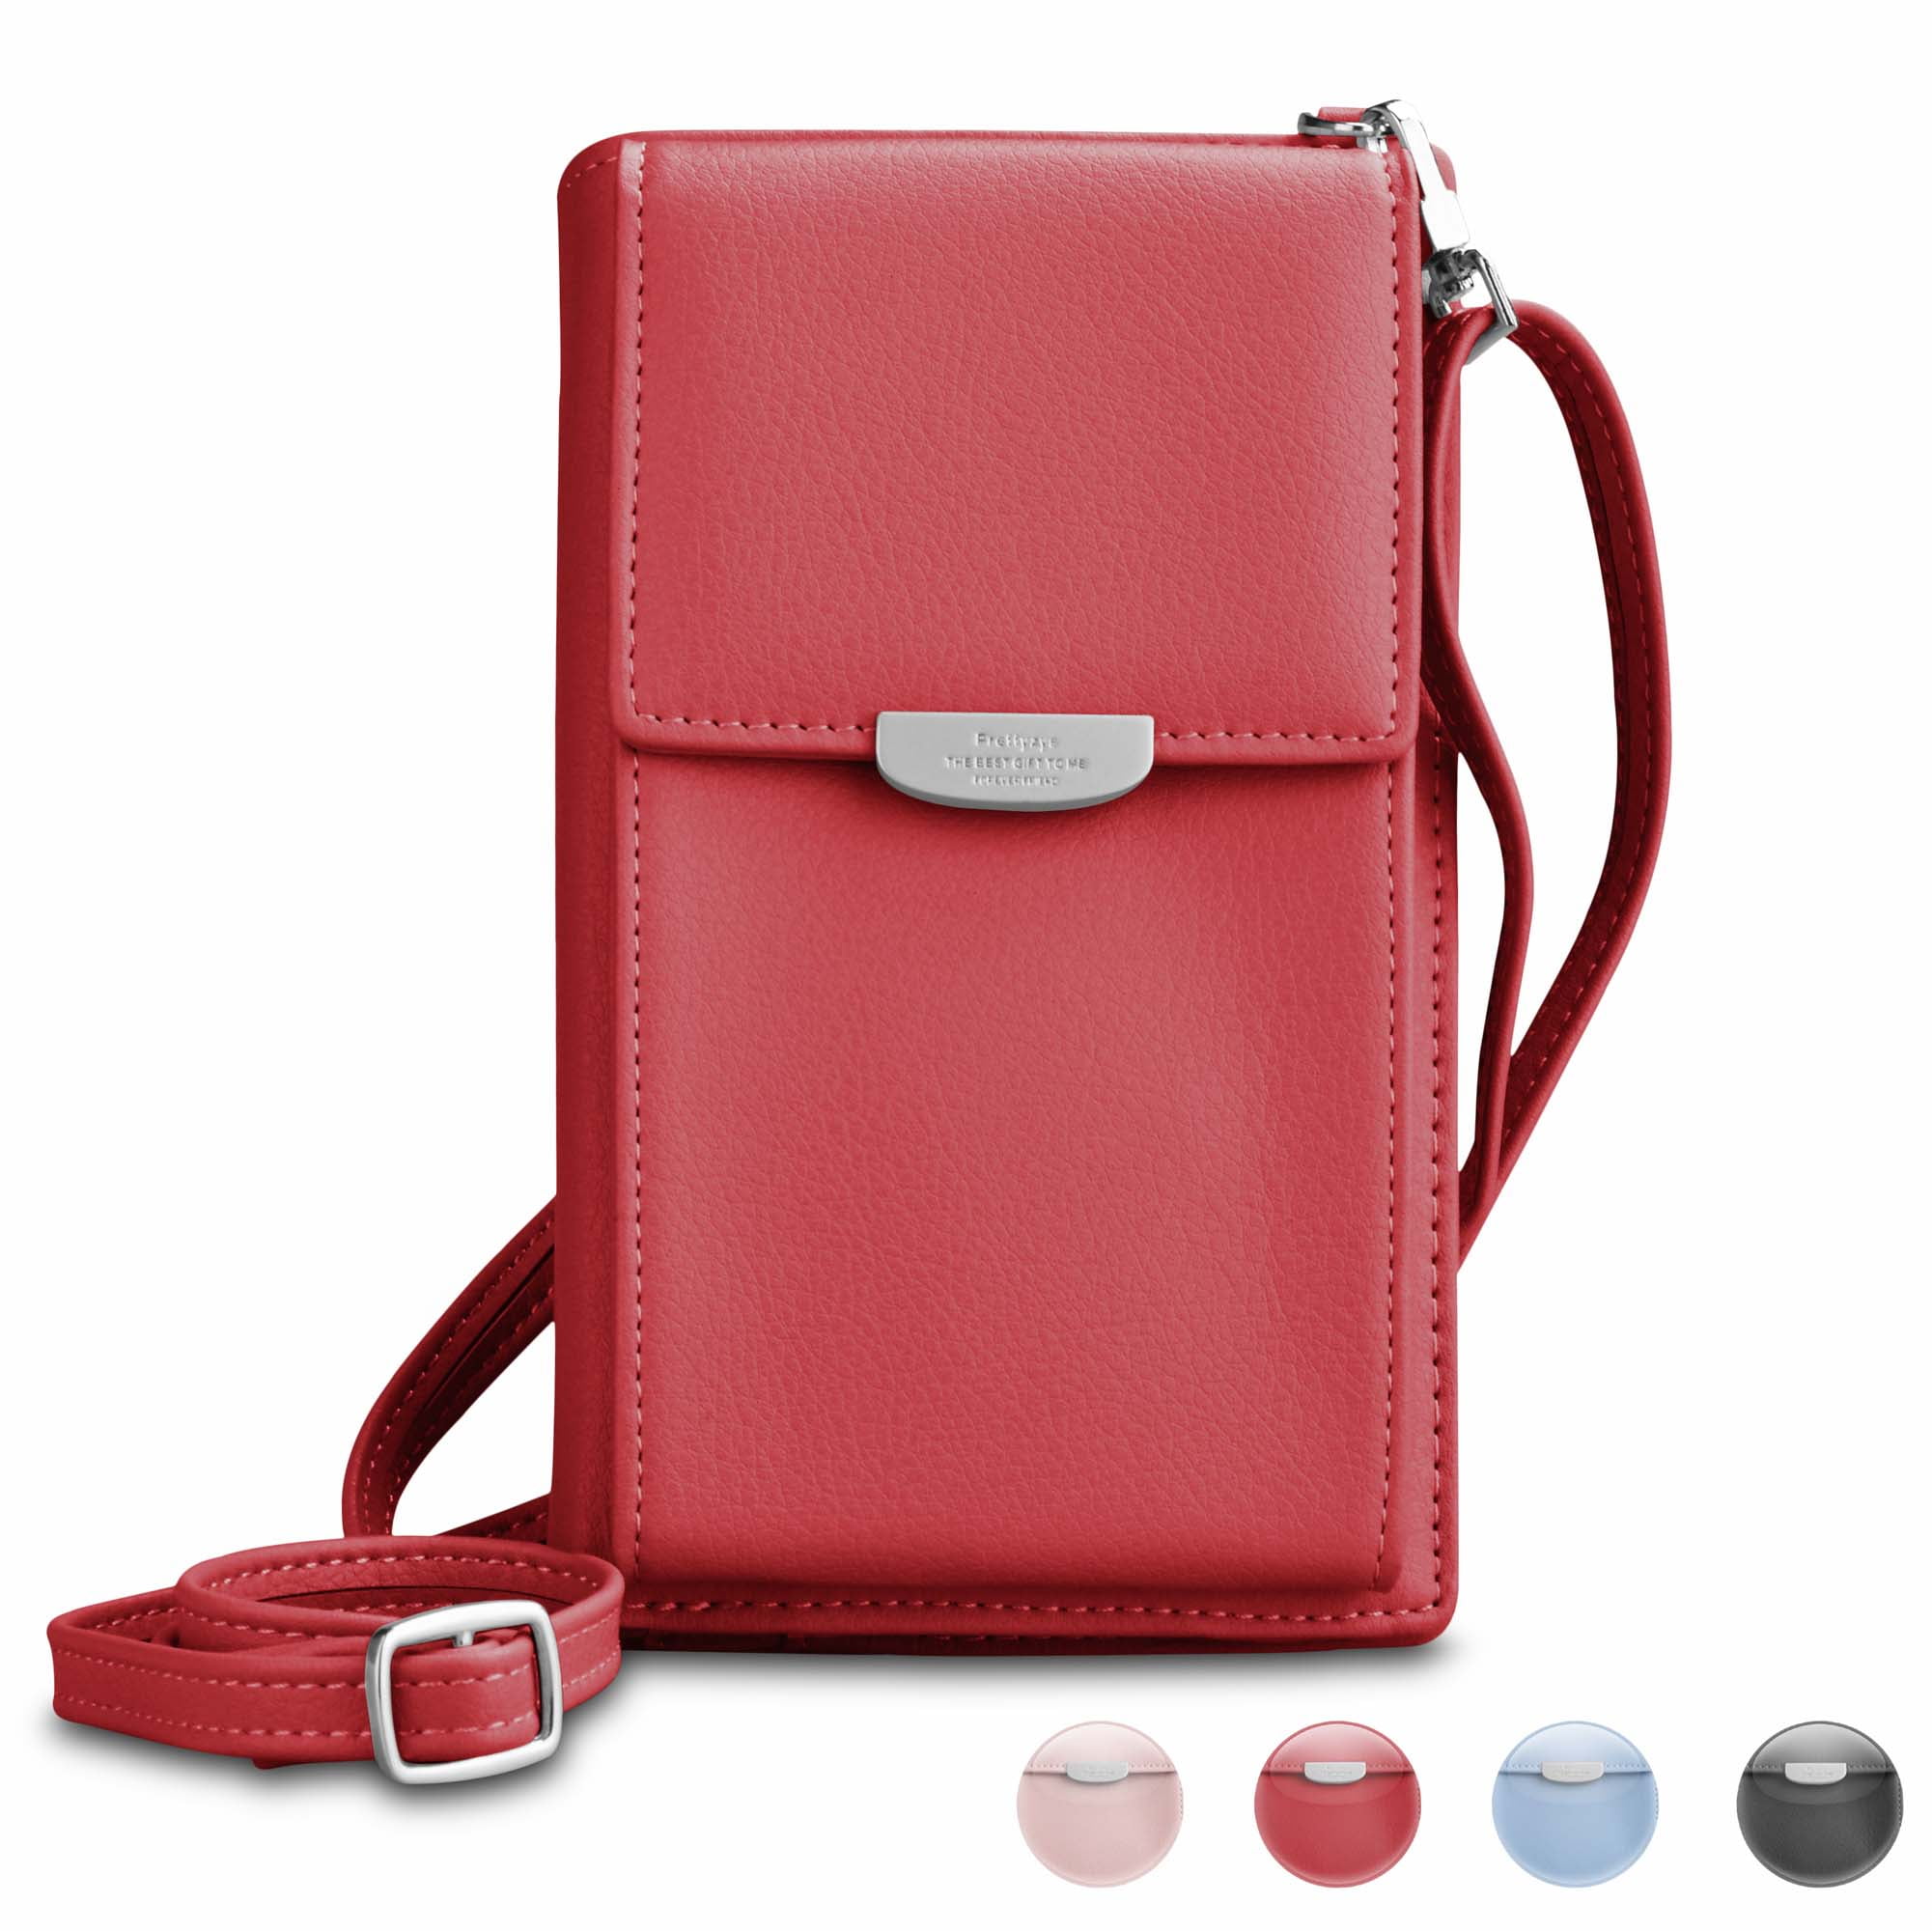 Njjex Lightweight Crossbody Phone Bag for Women Small Shoulder Bag Cell Phone Wallet Purses and Handbags with 8 Credit Card Slots Red 0ac39957 1f4f 447d b5f7 0dd7d87e5af7 1.4cfc4fc0686c16d2add5a60e91ef5f8f